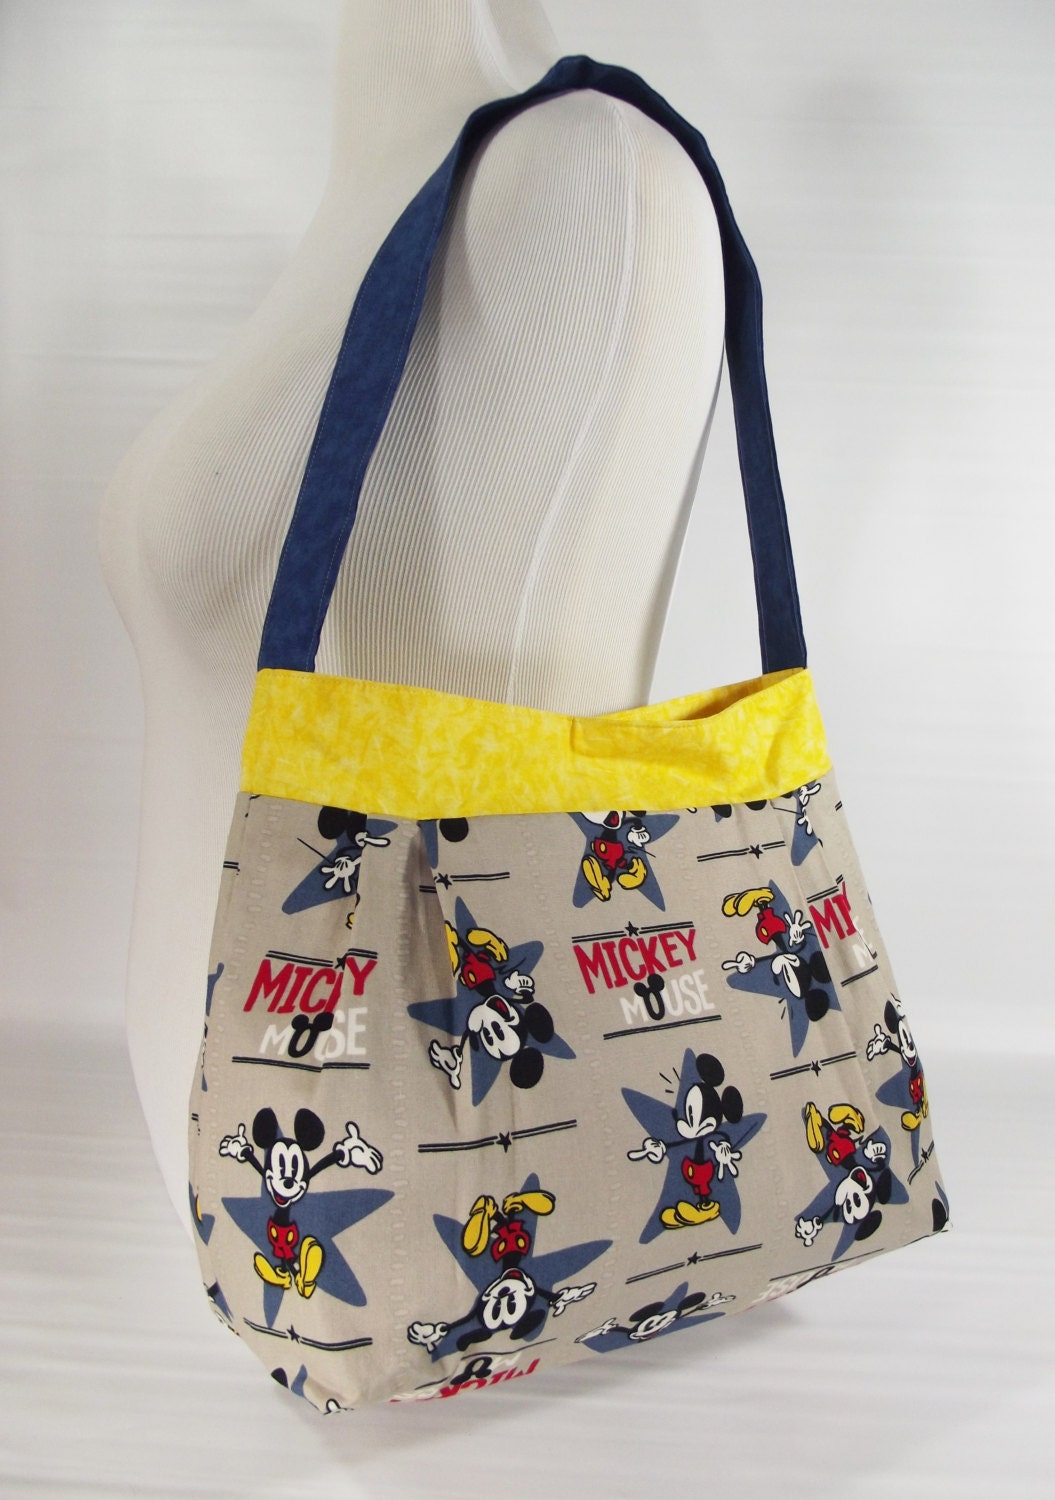 Mickey Mouse hand bag womens Mickey shoulder bag by LilFoxDesigns